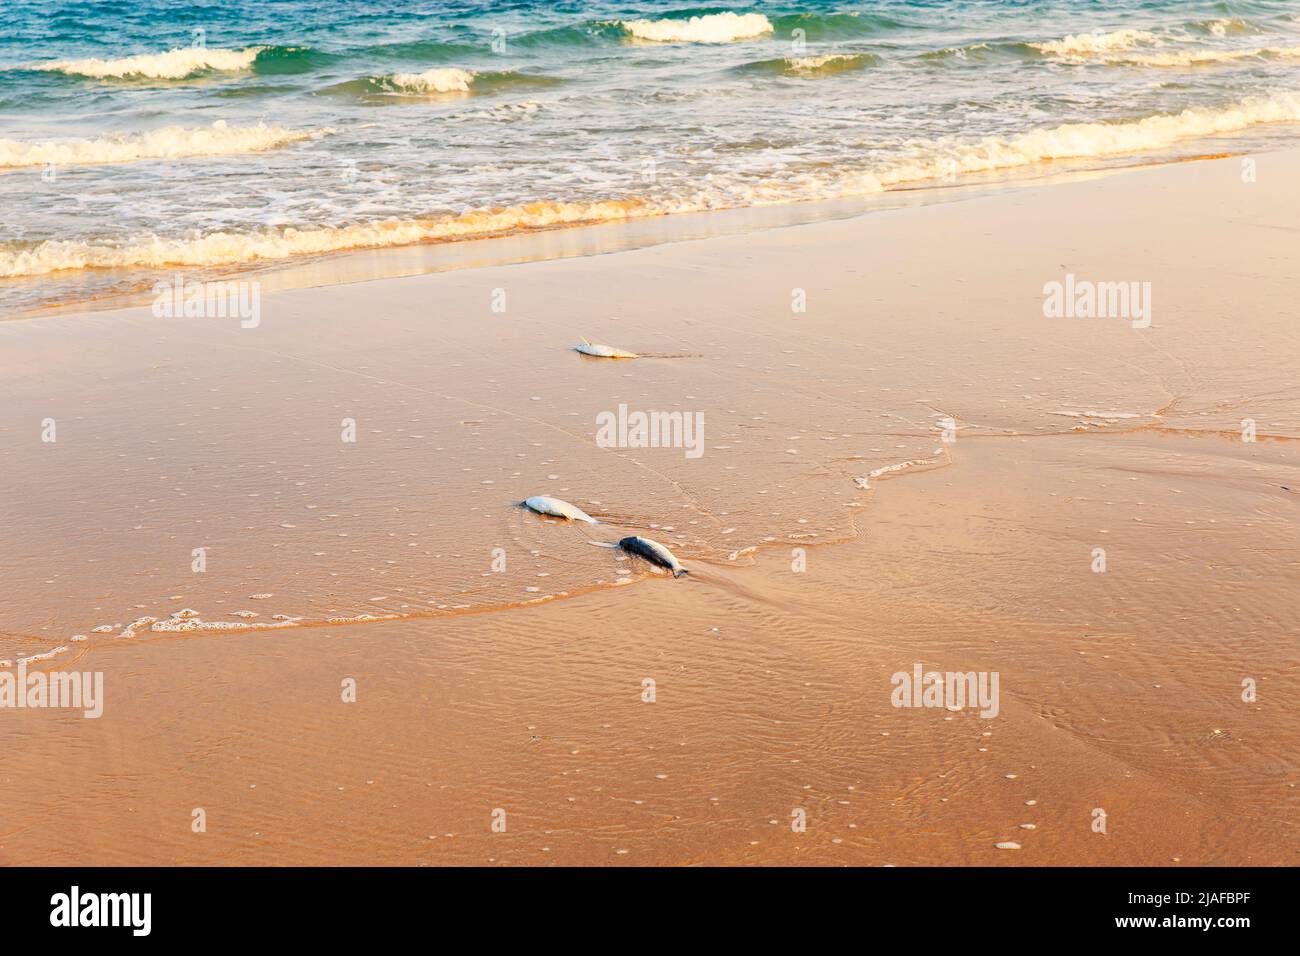 three dead fish washed up on the beach Stock Photo